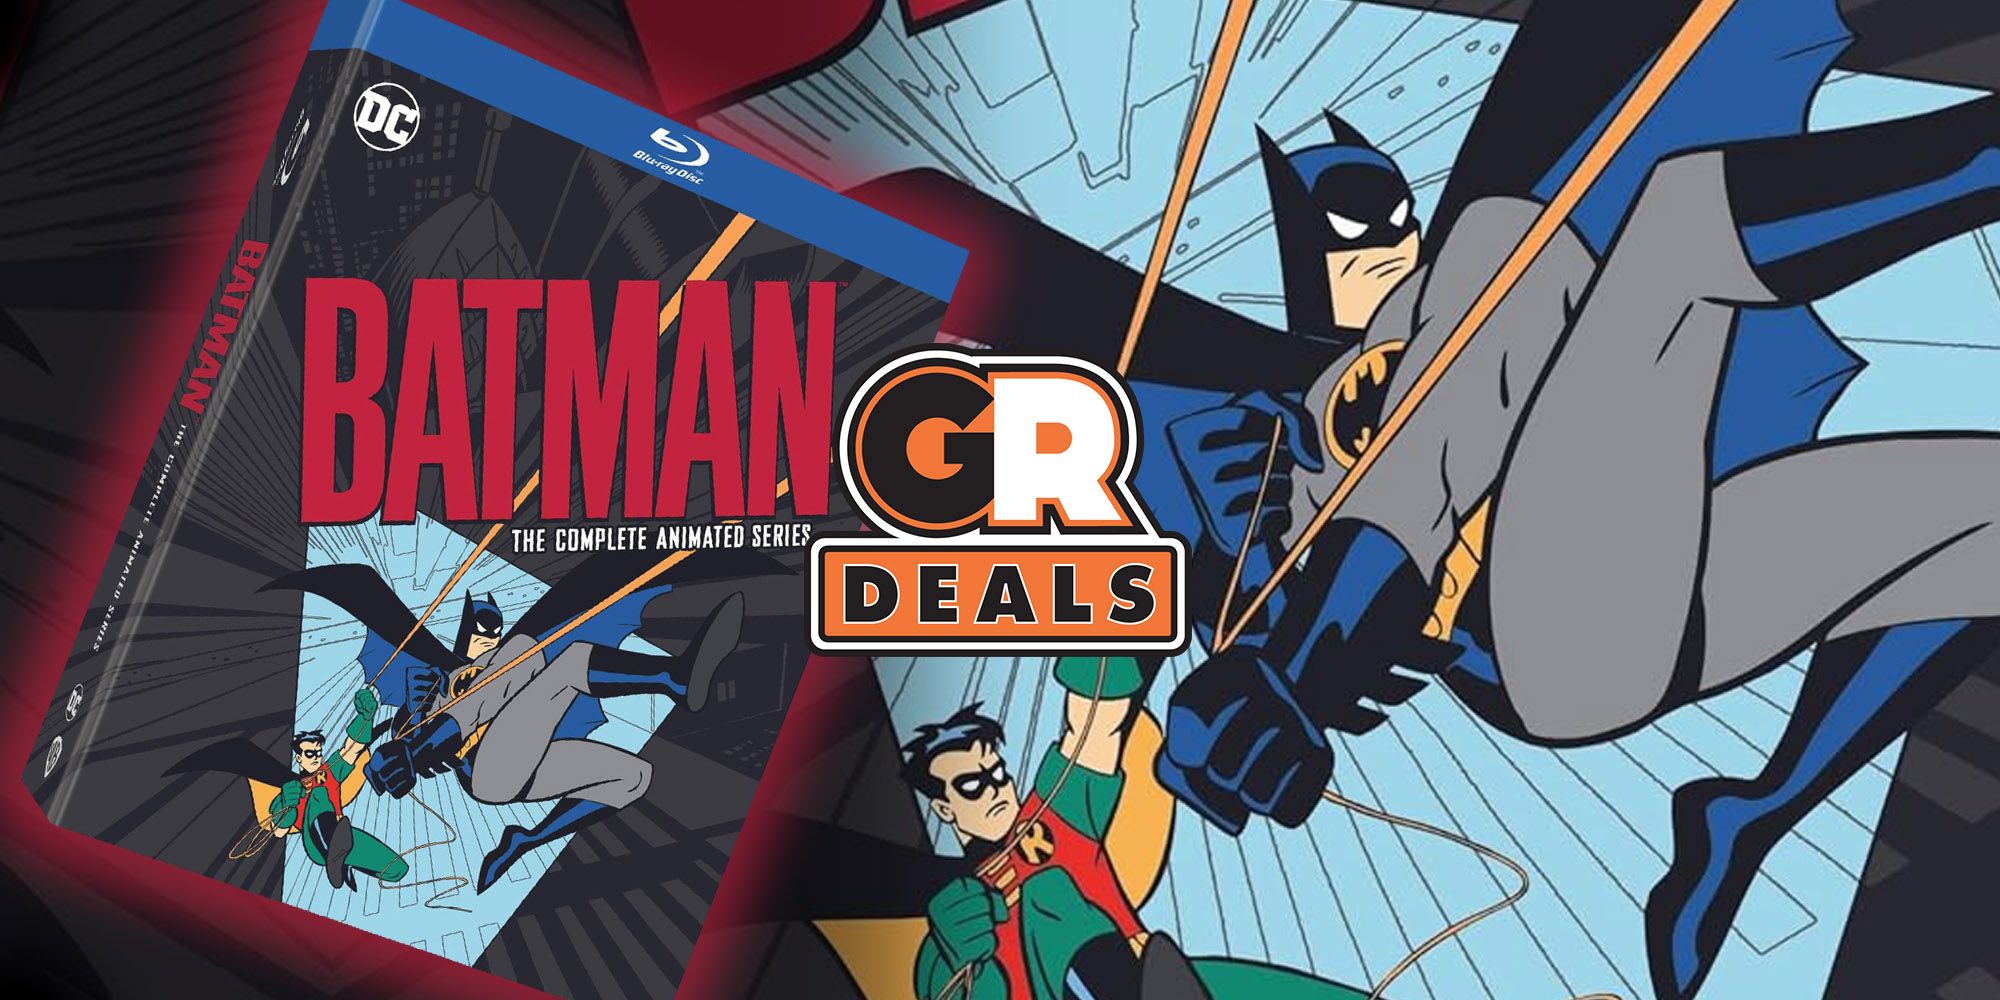 Batman The Complete Animated Series Blu-ray